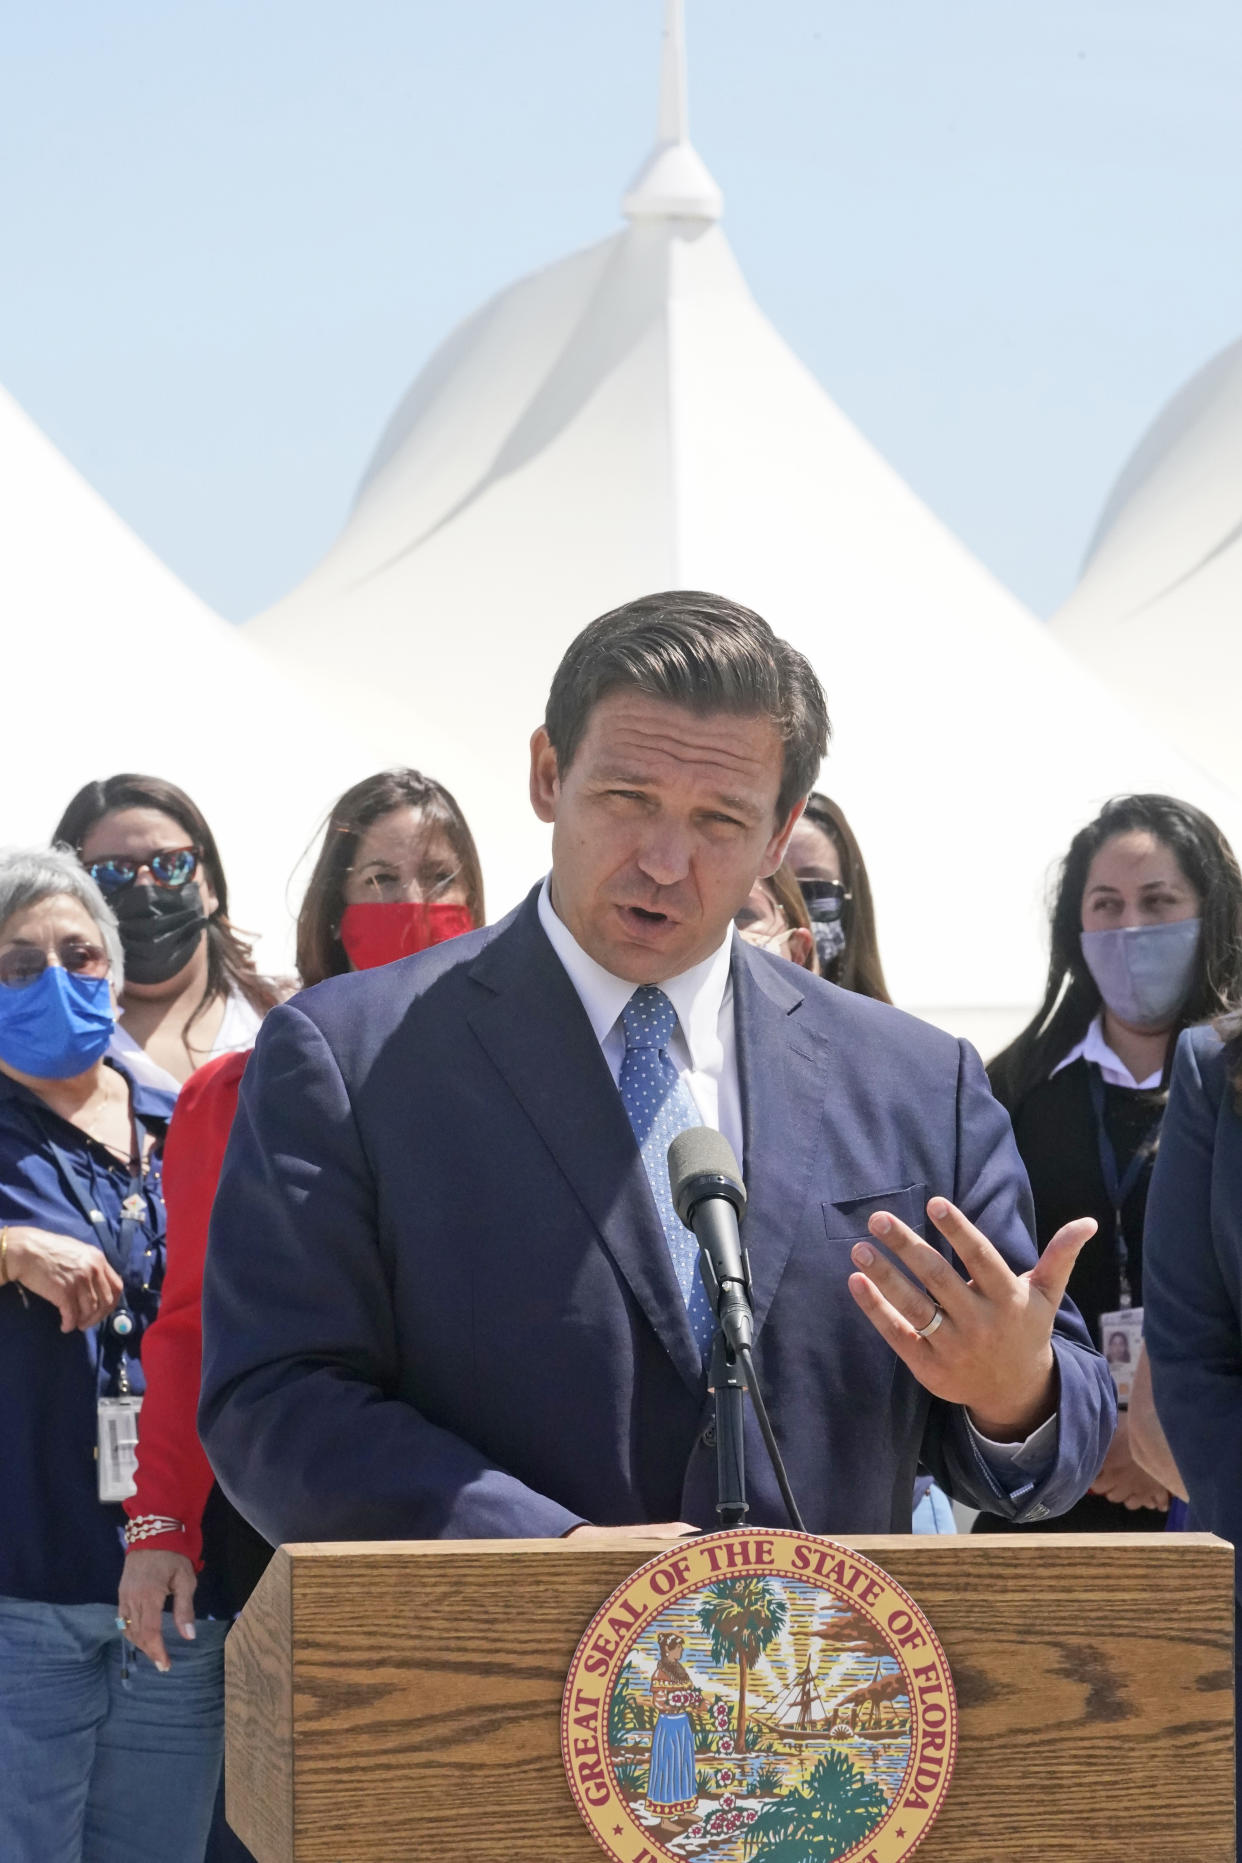 Florida Gov. Ron DeSantis speaks during a news conference, Thursday, April 8, 2021, at PortMiami in Miami. DeSantis announced a lawsuit against the federal government and the CDC demanding that cruise ships be allowed to sail. (AP Photo/Wilfredo Lee)